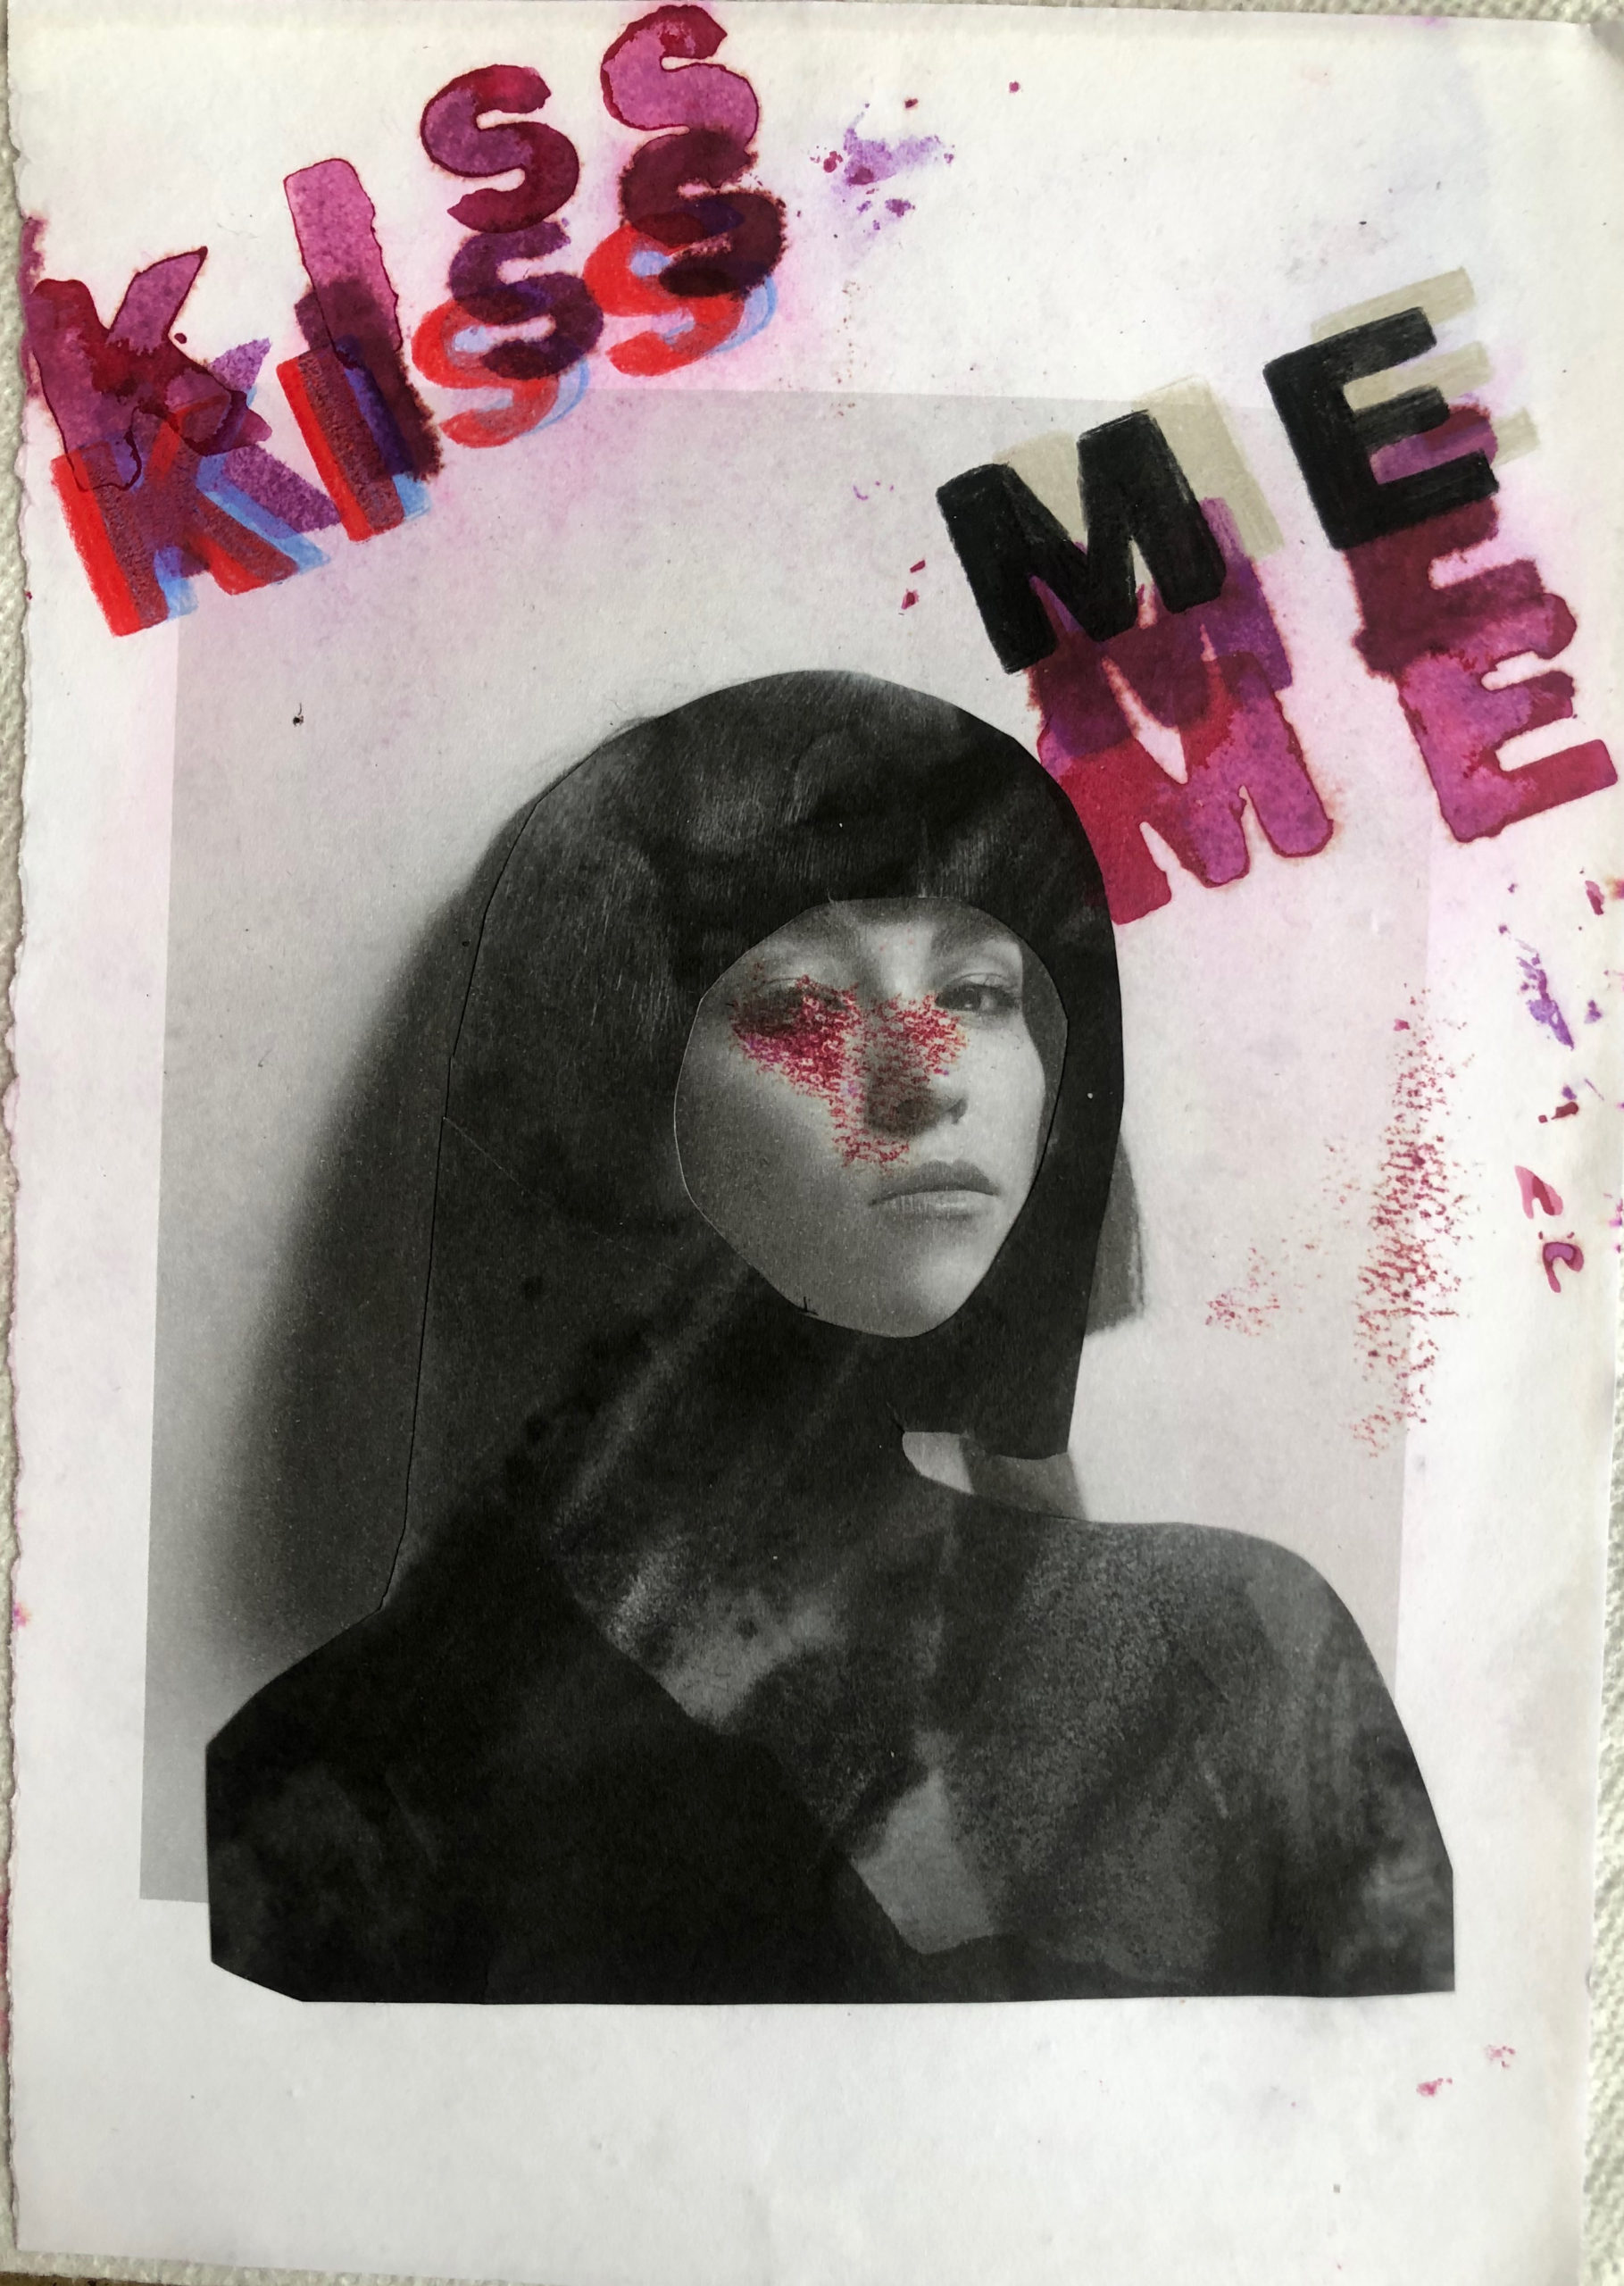 A woman's three-quarter profile with the words 'KISS ME' printed over her image